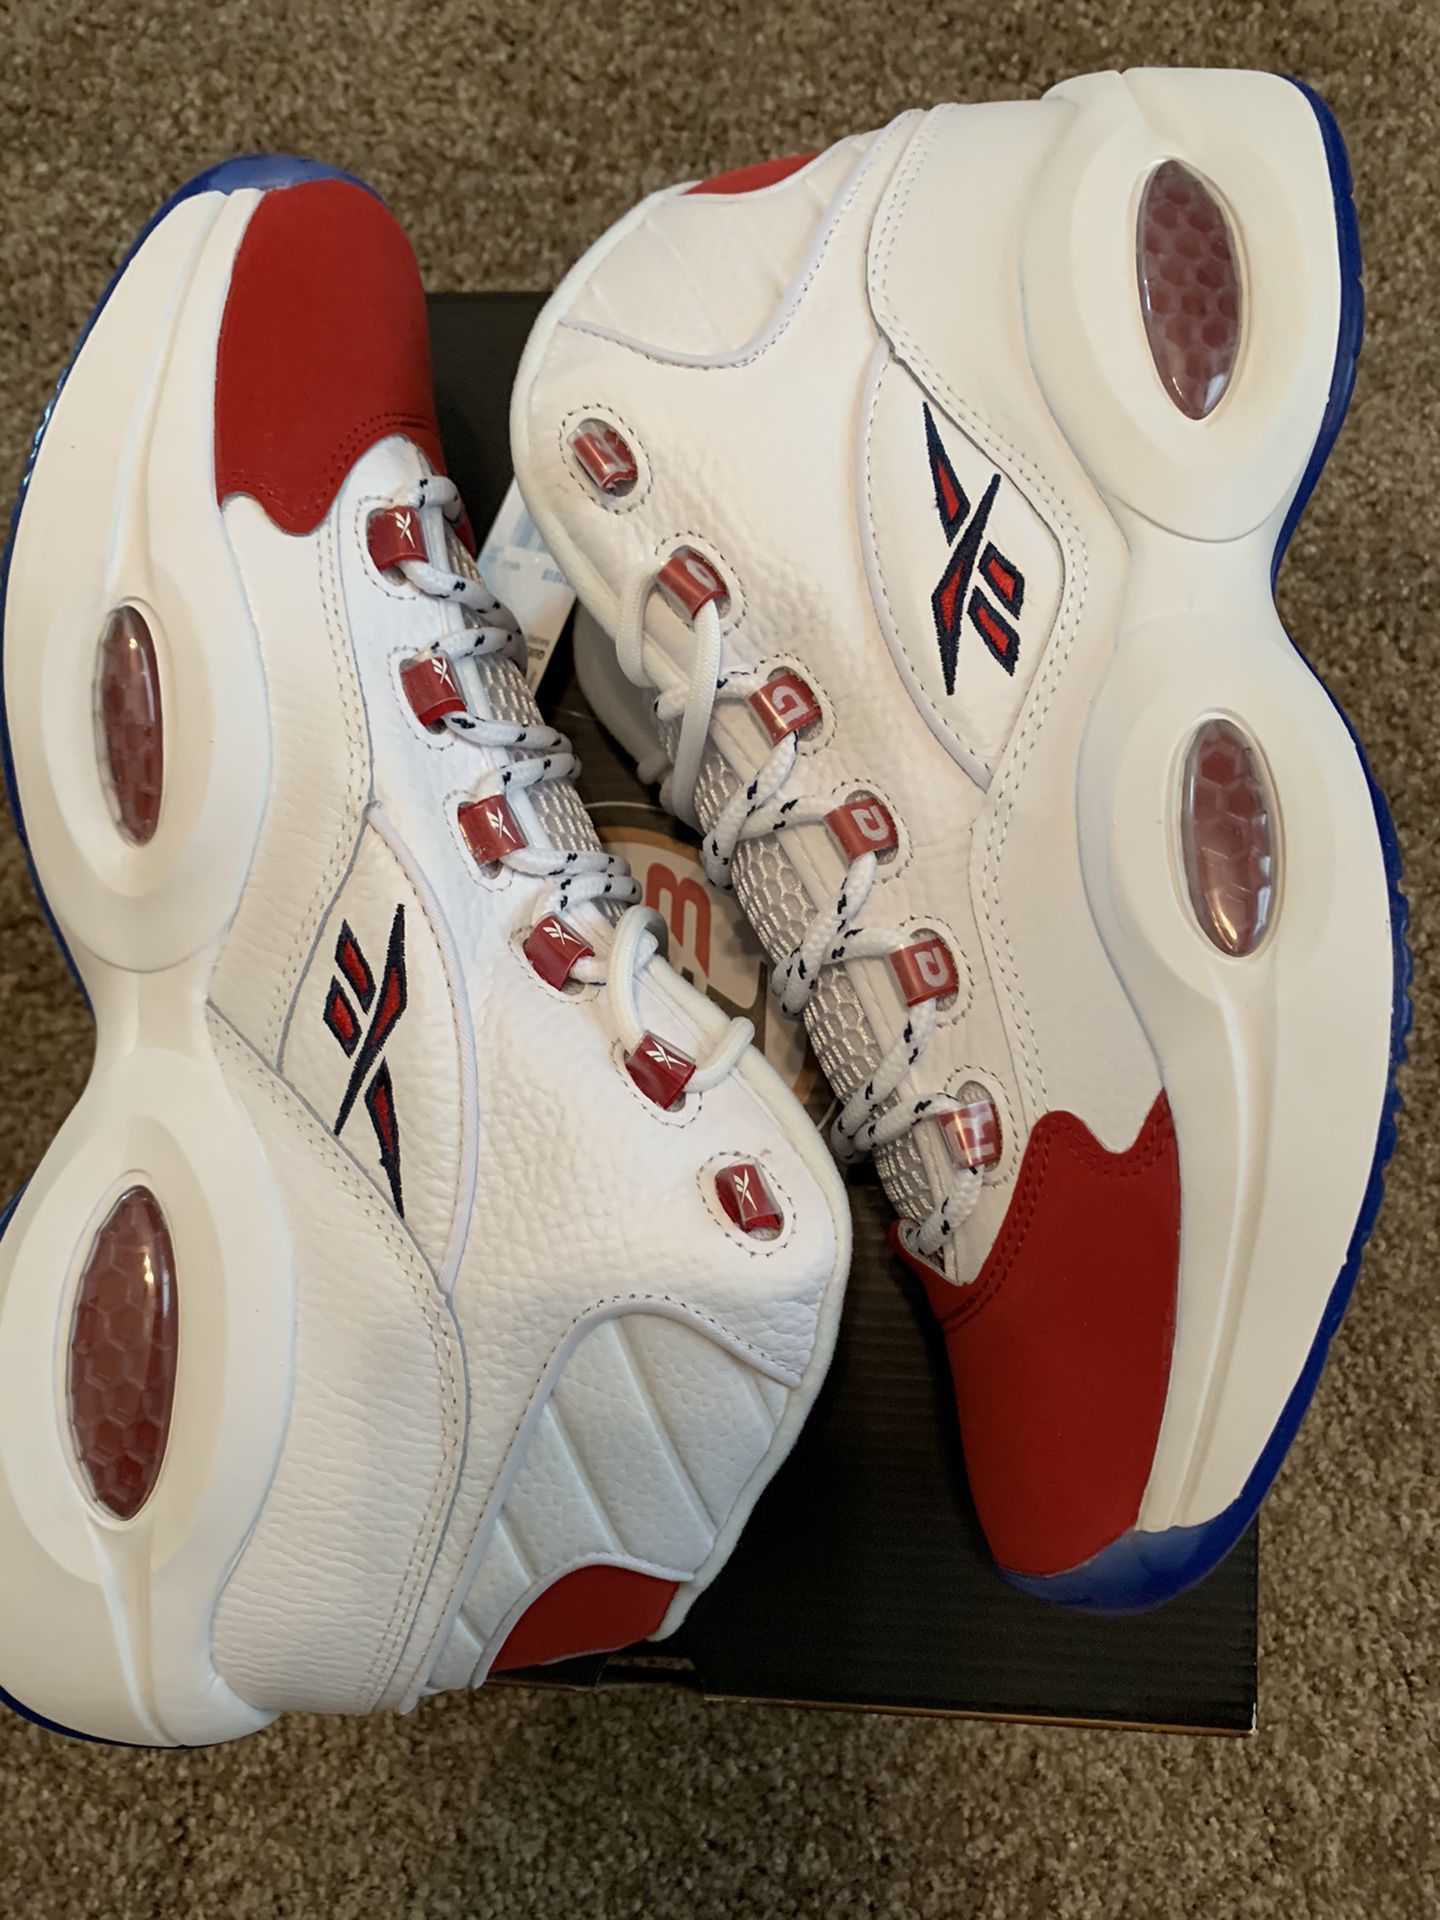 Reebok Question Red Toe Size 11.5 left